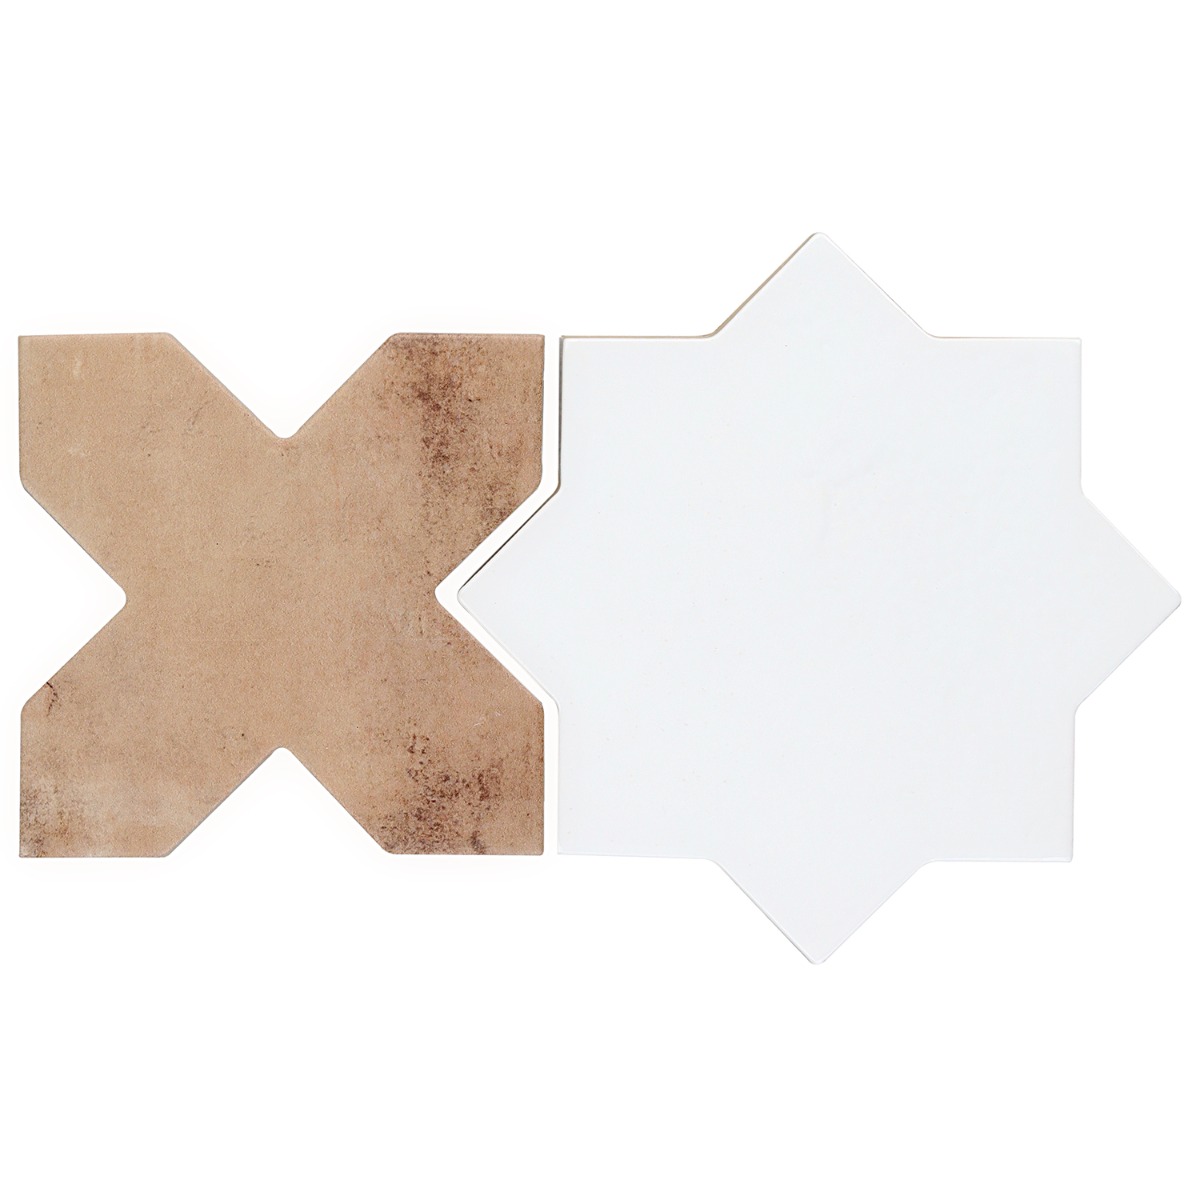 Not for Sale-Parma White Polished Star and Cotto Brown Matte Cross 6" Terracotta Porcelain Tile